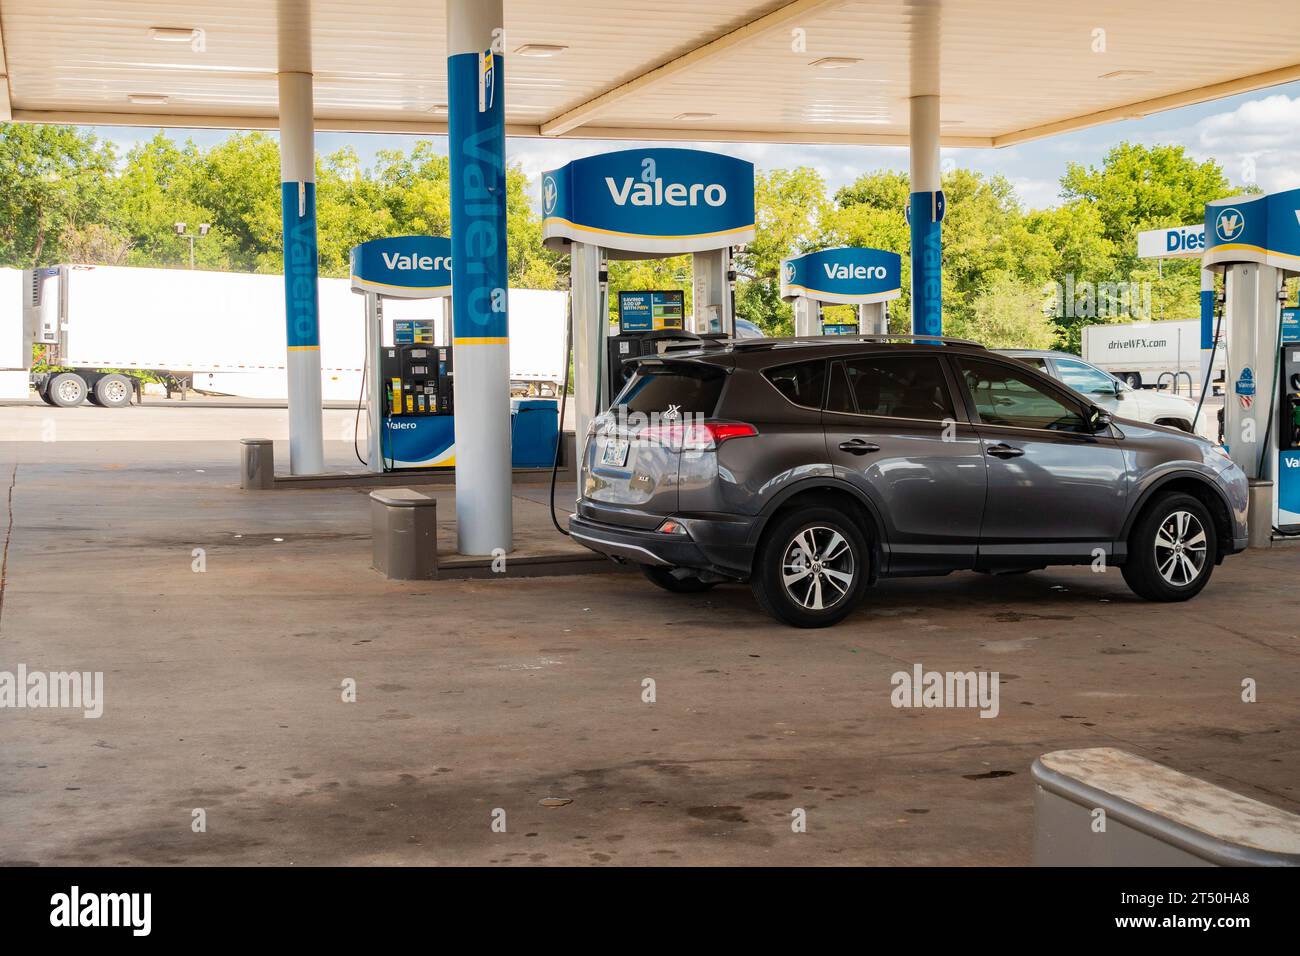 An automobile parked next to Valero brand gasoline or petrol pumps at a filling station or refueling station in Guthrie, Oklahoma, USA. Stock Photo